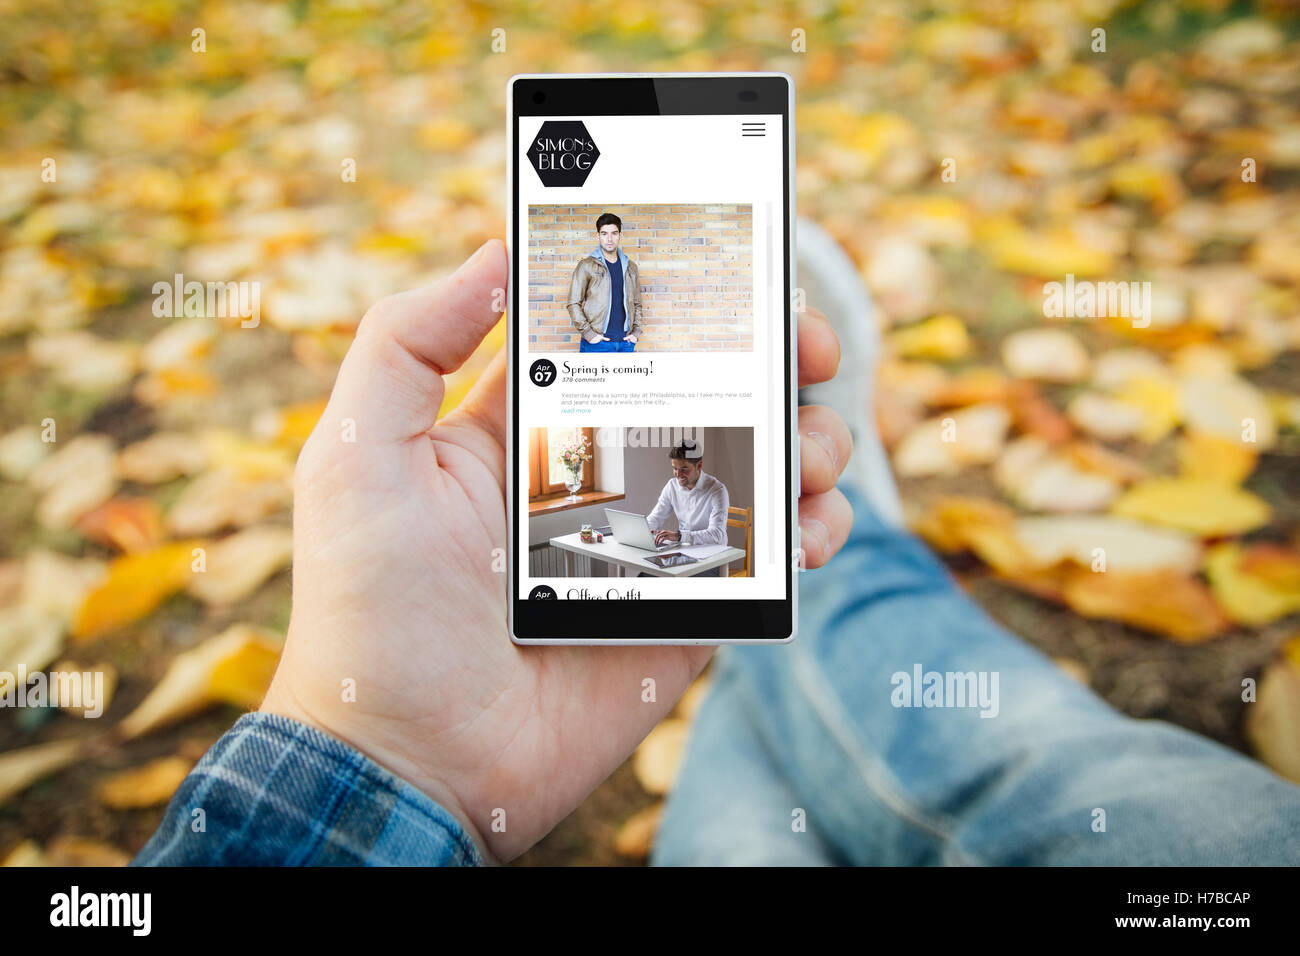 man in the park with blog smartphone. All screen graphics are made up. Stock Photo